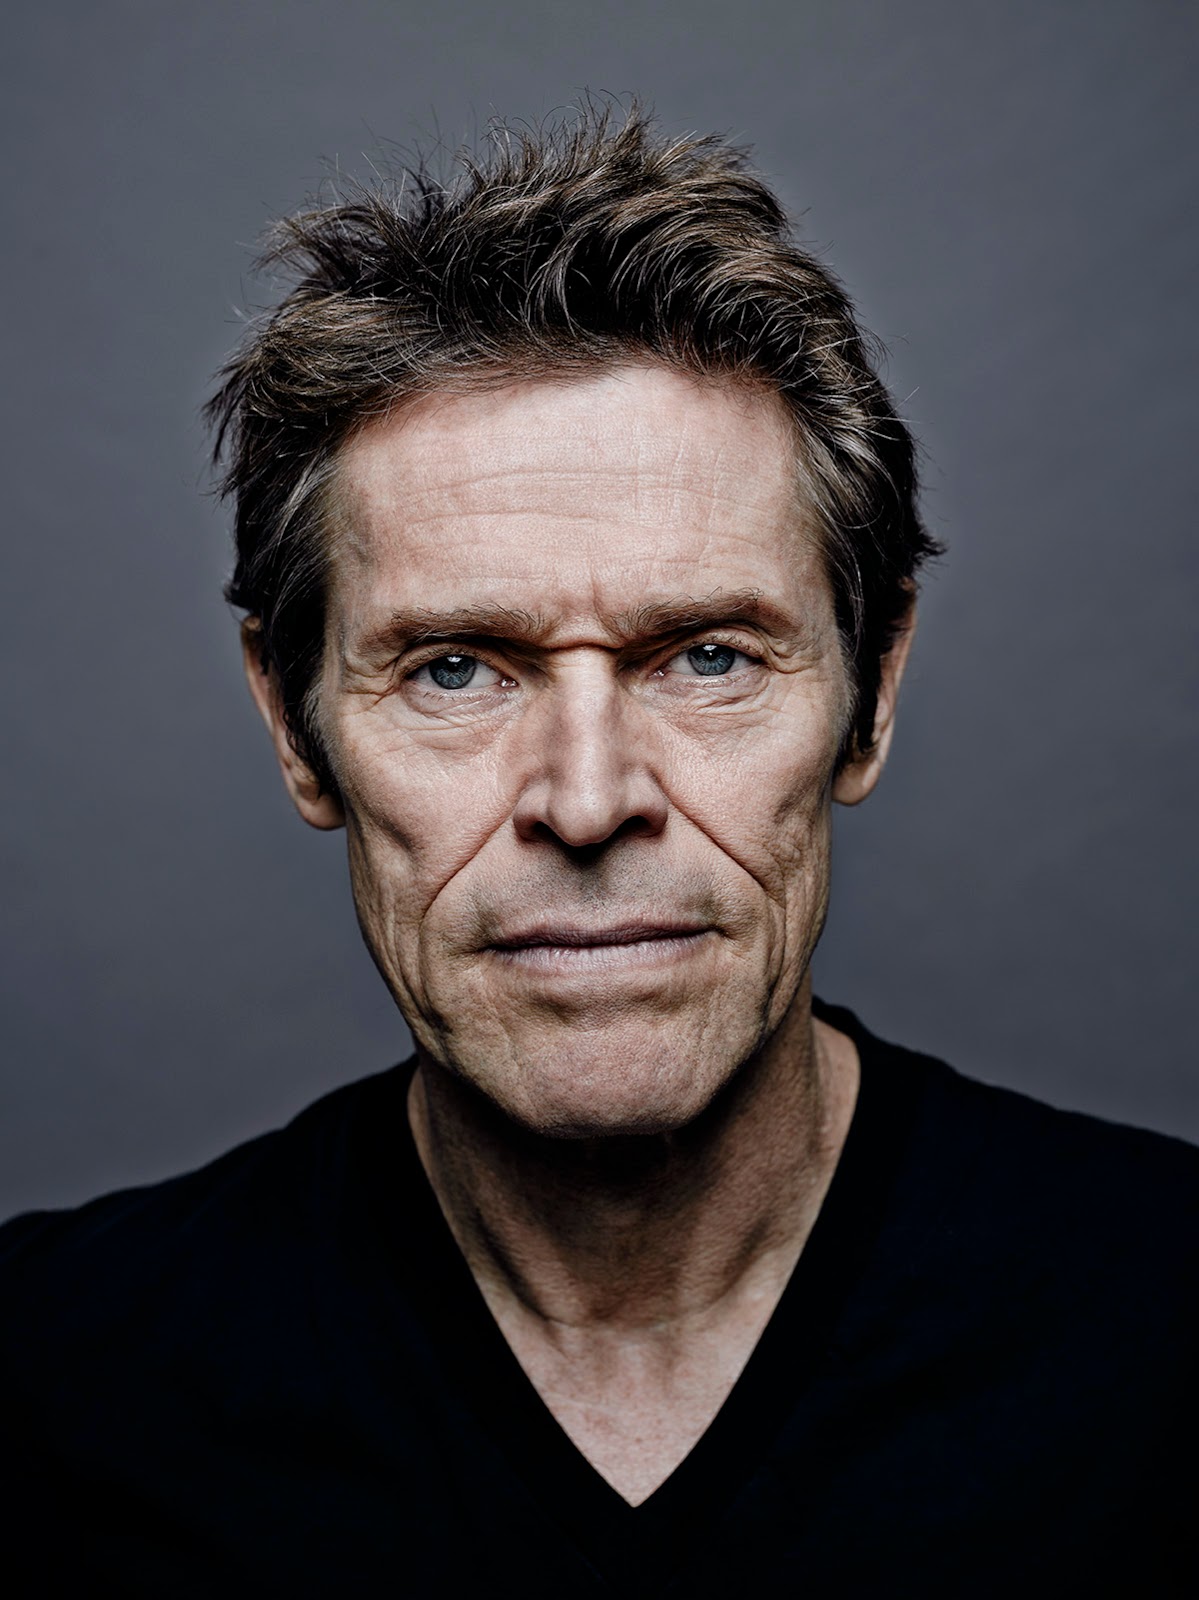 dragon-willem-dafoe-i-m-not-supposed-to-be-in-this-movie